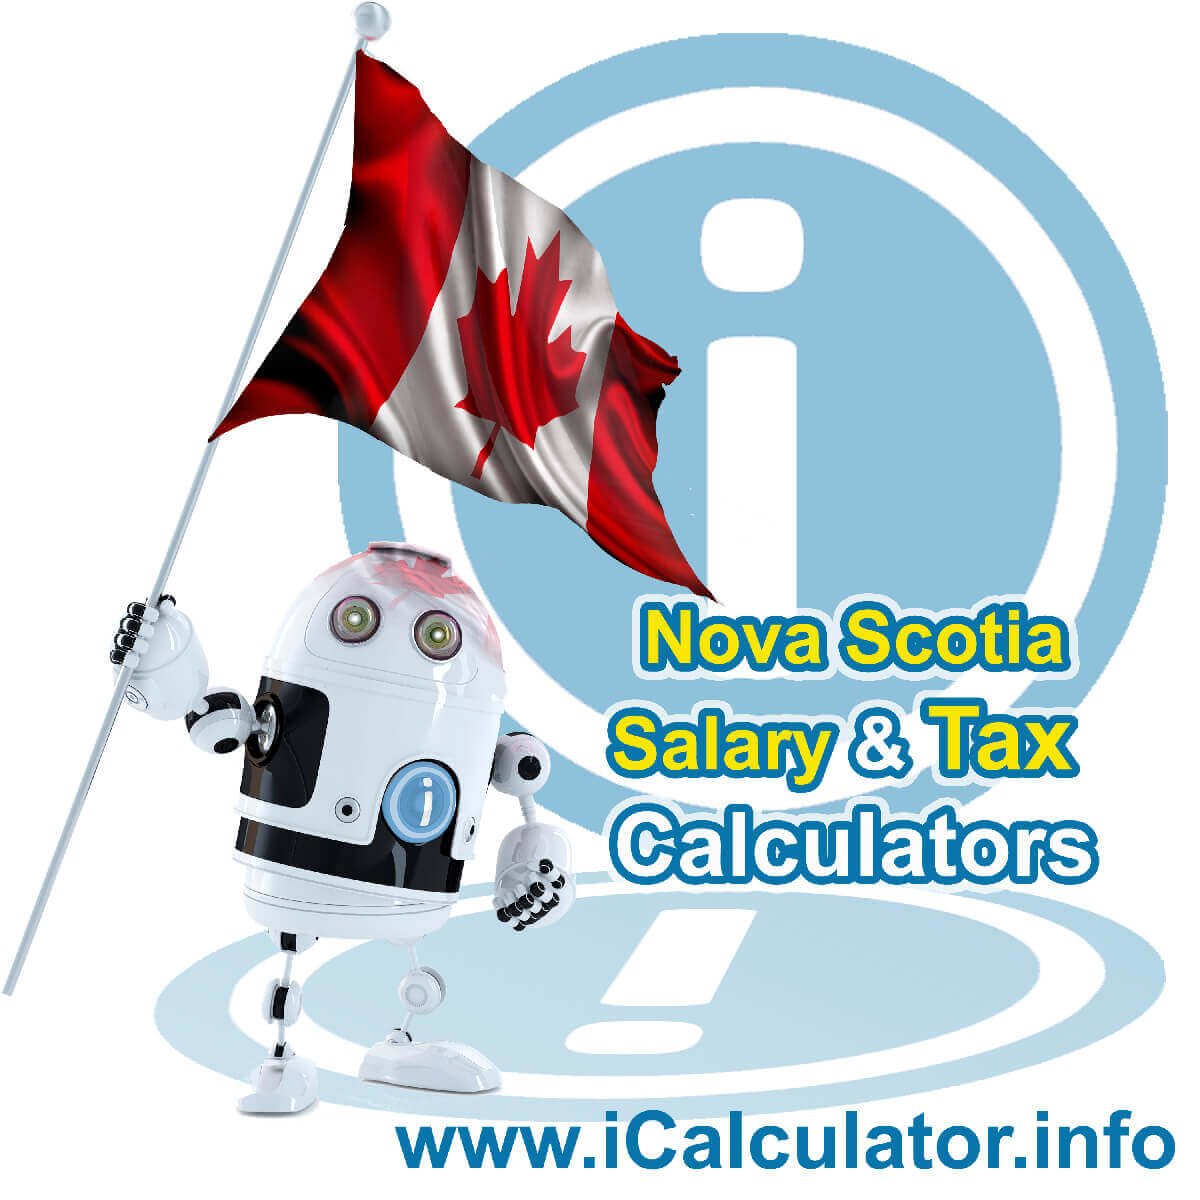 Nova Scotia 2022 Salary Comparison Calculator. This image shows the Nova Scotia flag and information relating to the tax formula used in the Nova Scotia 2022 Salary Comparison Calculator